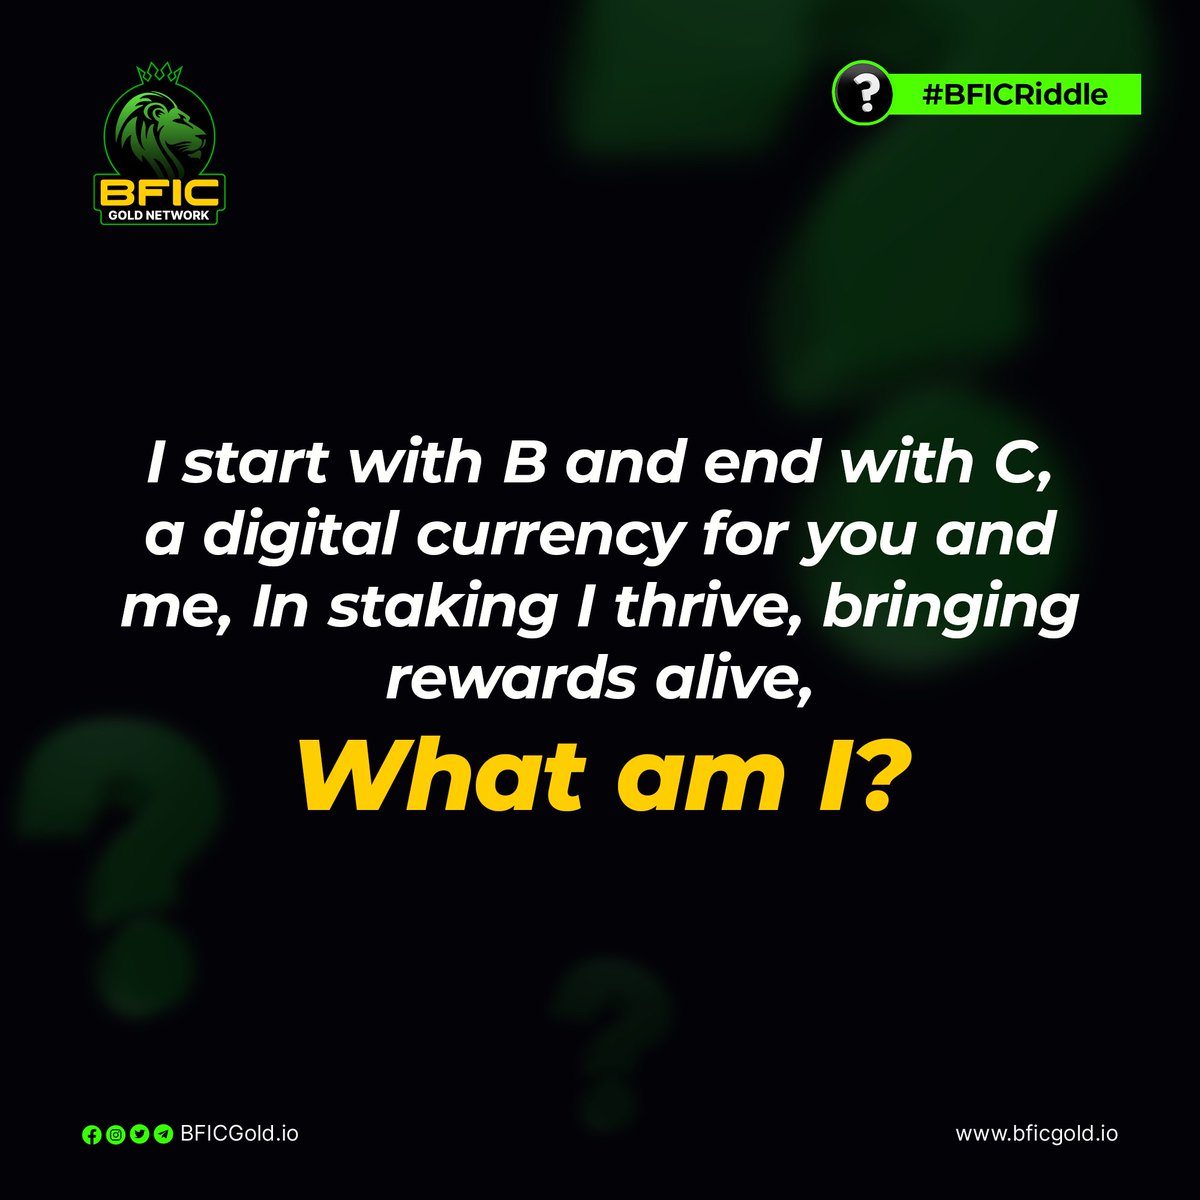 🔍 Can you solve the mystery? 🤔
Guess the riddle and comment your answer below! Let's see who can crack it first! 💡
.
.
.
#RiddleChallenge #BrainTeaser #PuzzleFun #GuessTheRiddle #TestYourBrain #CommentYourAnswer #RiddleTime #BrainTeaserGame #MysterySolved #PuzzleMaster